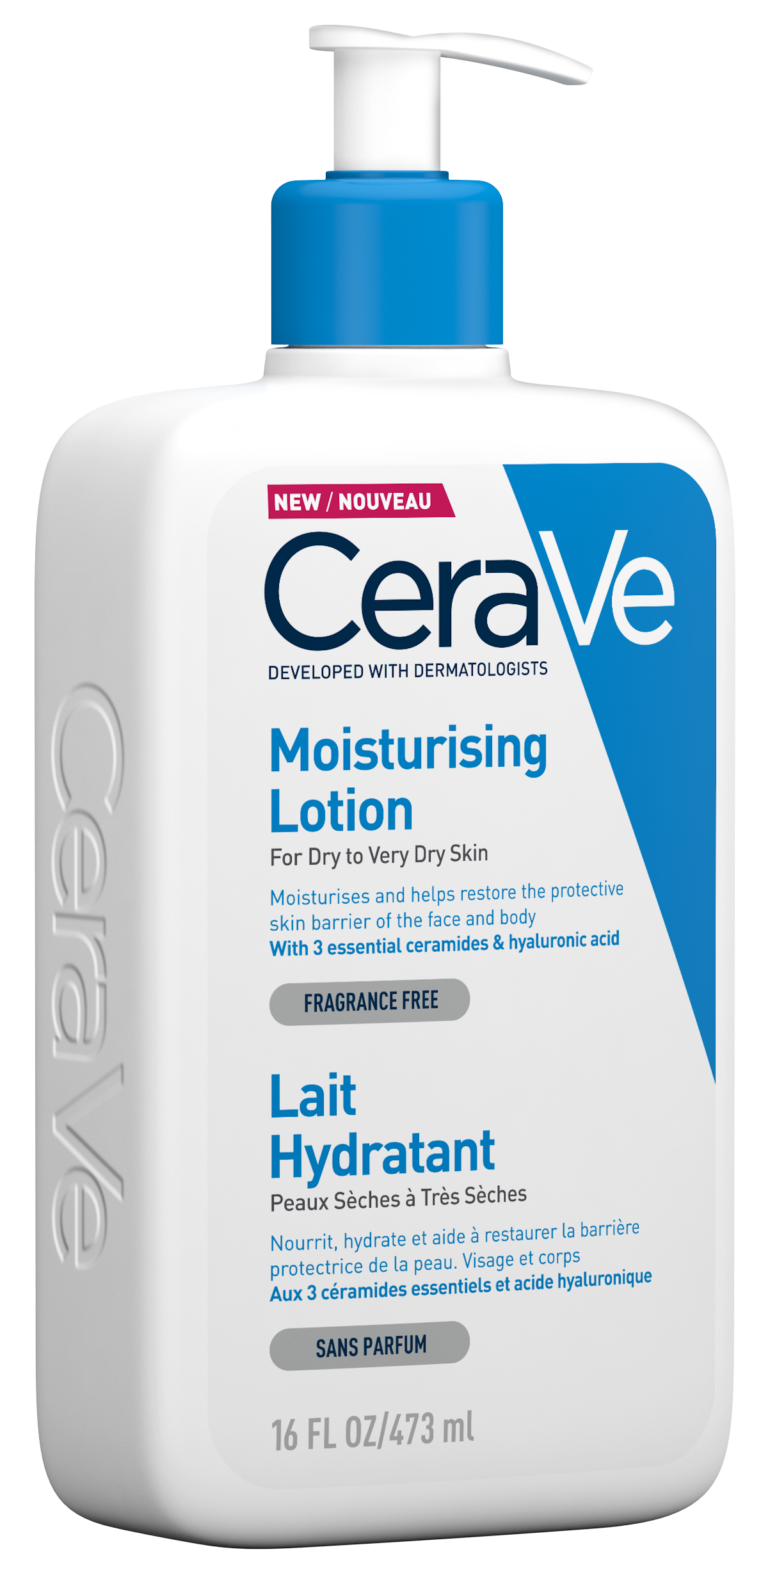 Cerave Moisturizing Lotion Daily Face And Body Moisturizer For Dry To